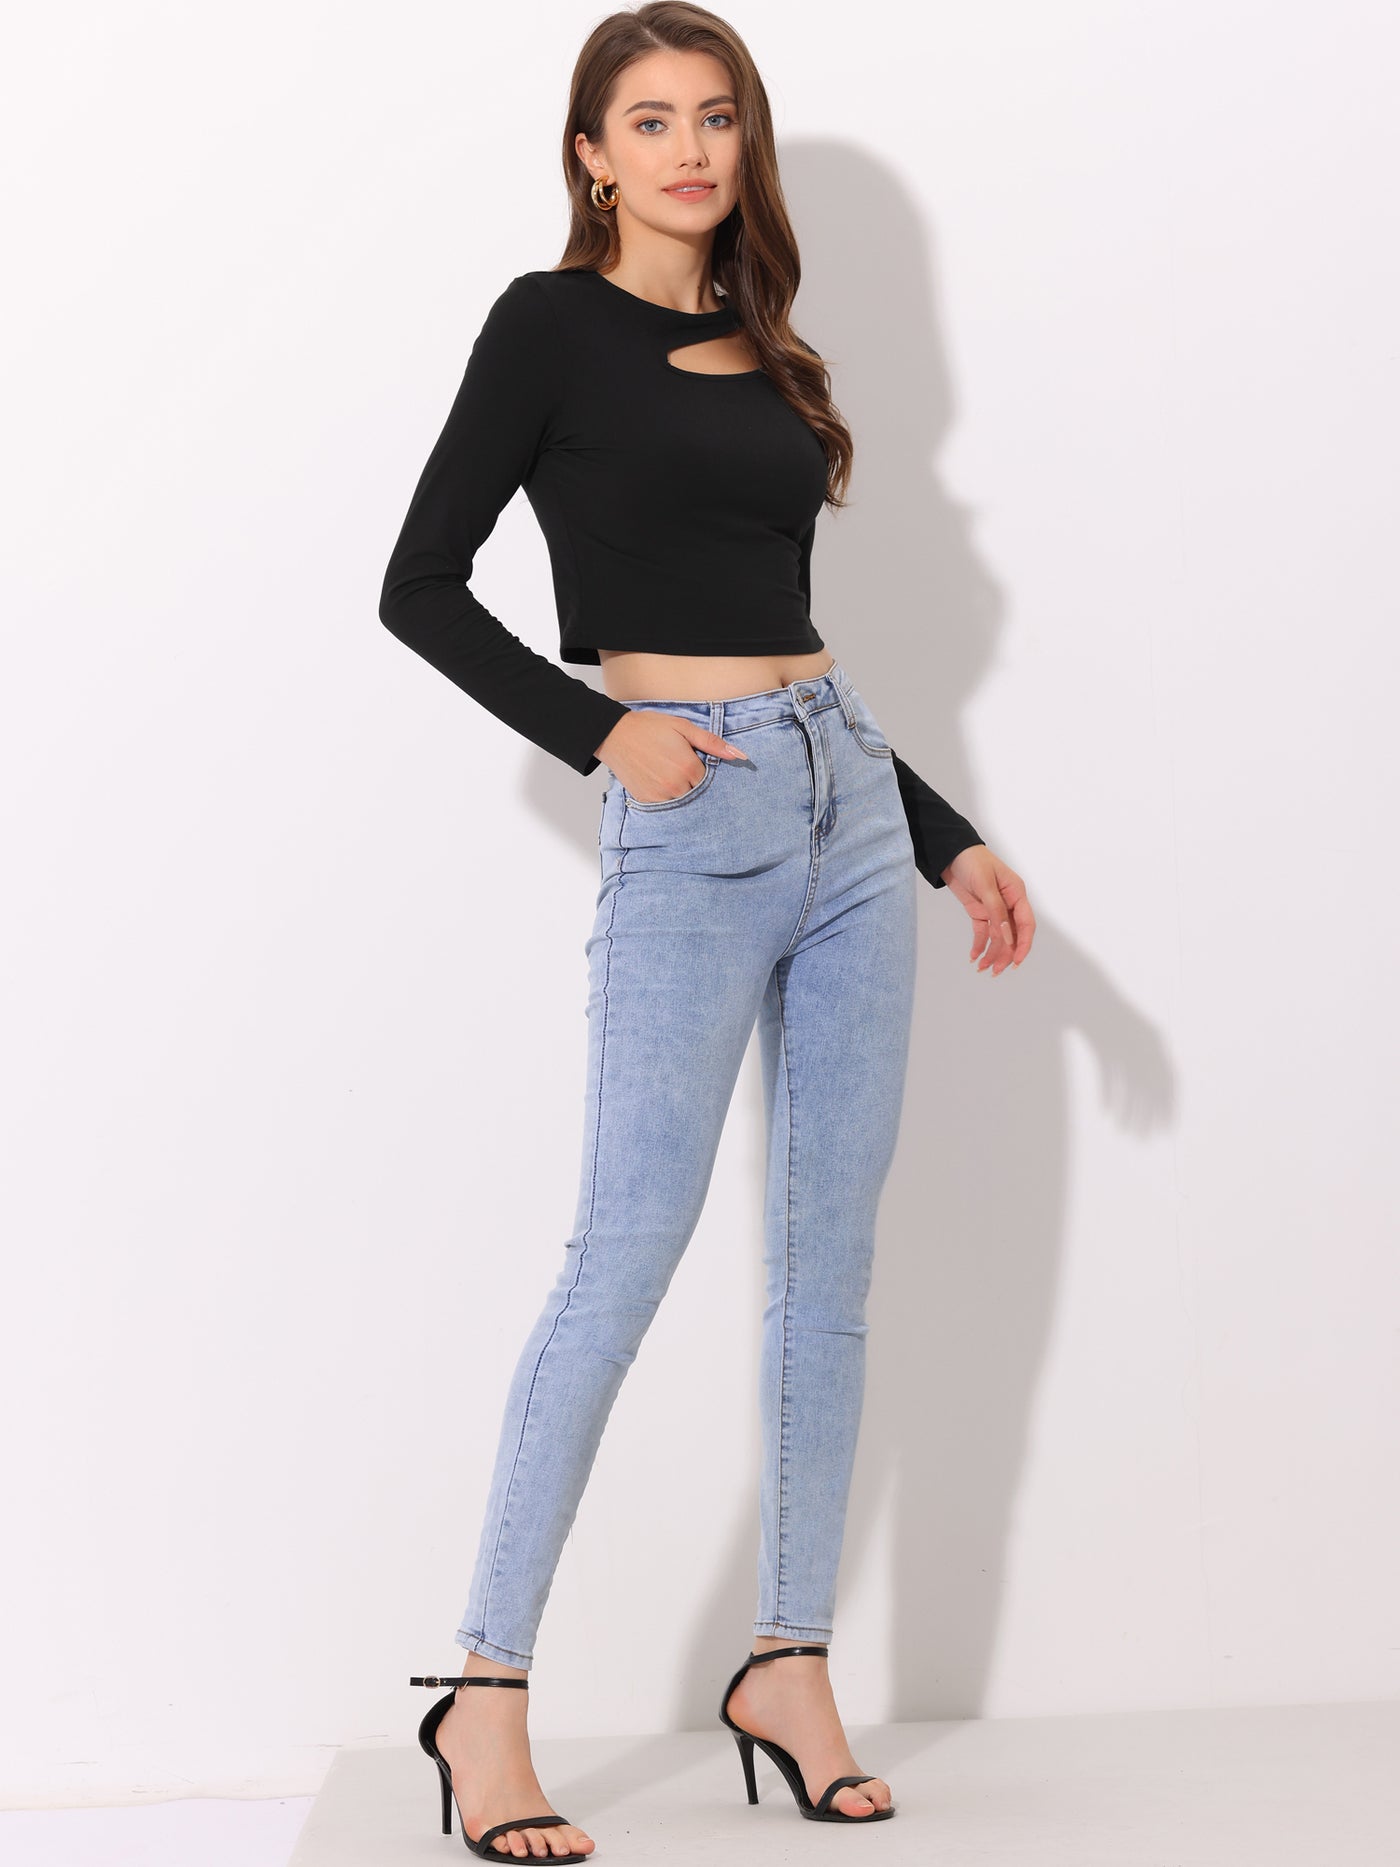 Allegra K Long Sleeve Casual Cut Out Slim Fitted Basic Crop Tee Tops